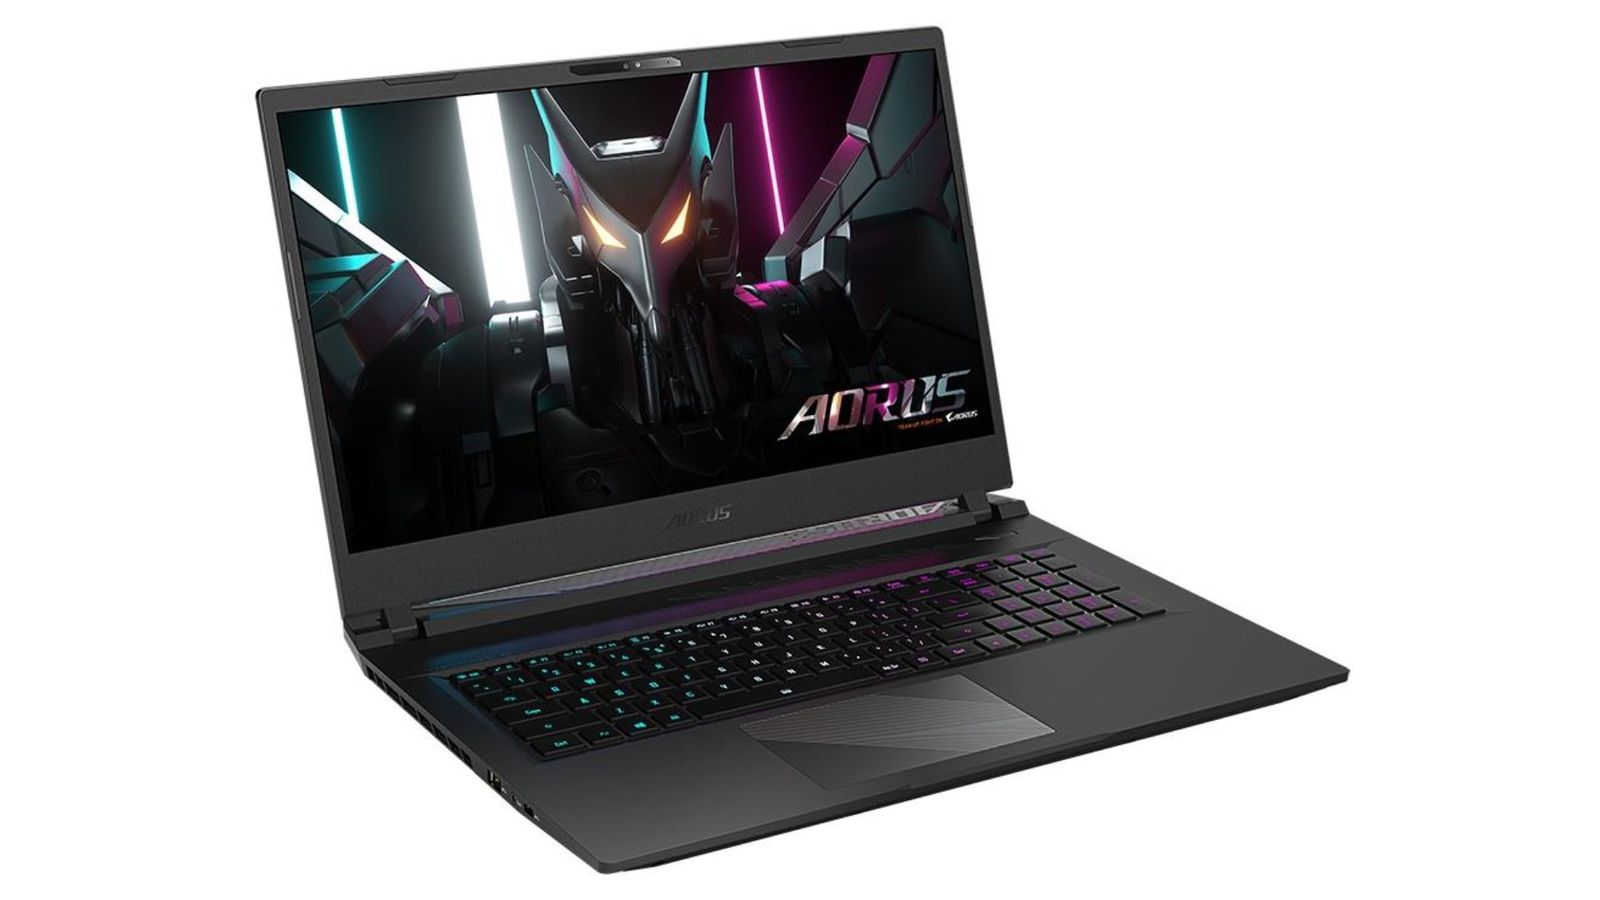 Best Starfield gaming laptop - Gigabyte AORUS 17 product image of a black gaming laptop featuring blue fading to purple backlit keys and a mechanical animal graphic on the display.